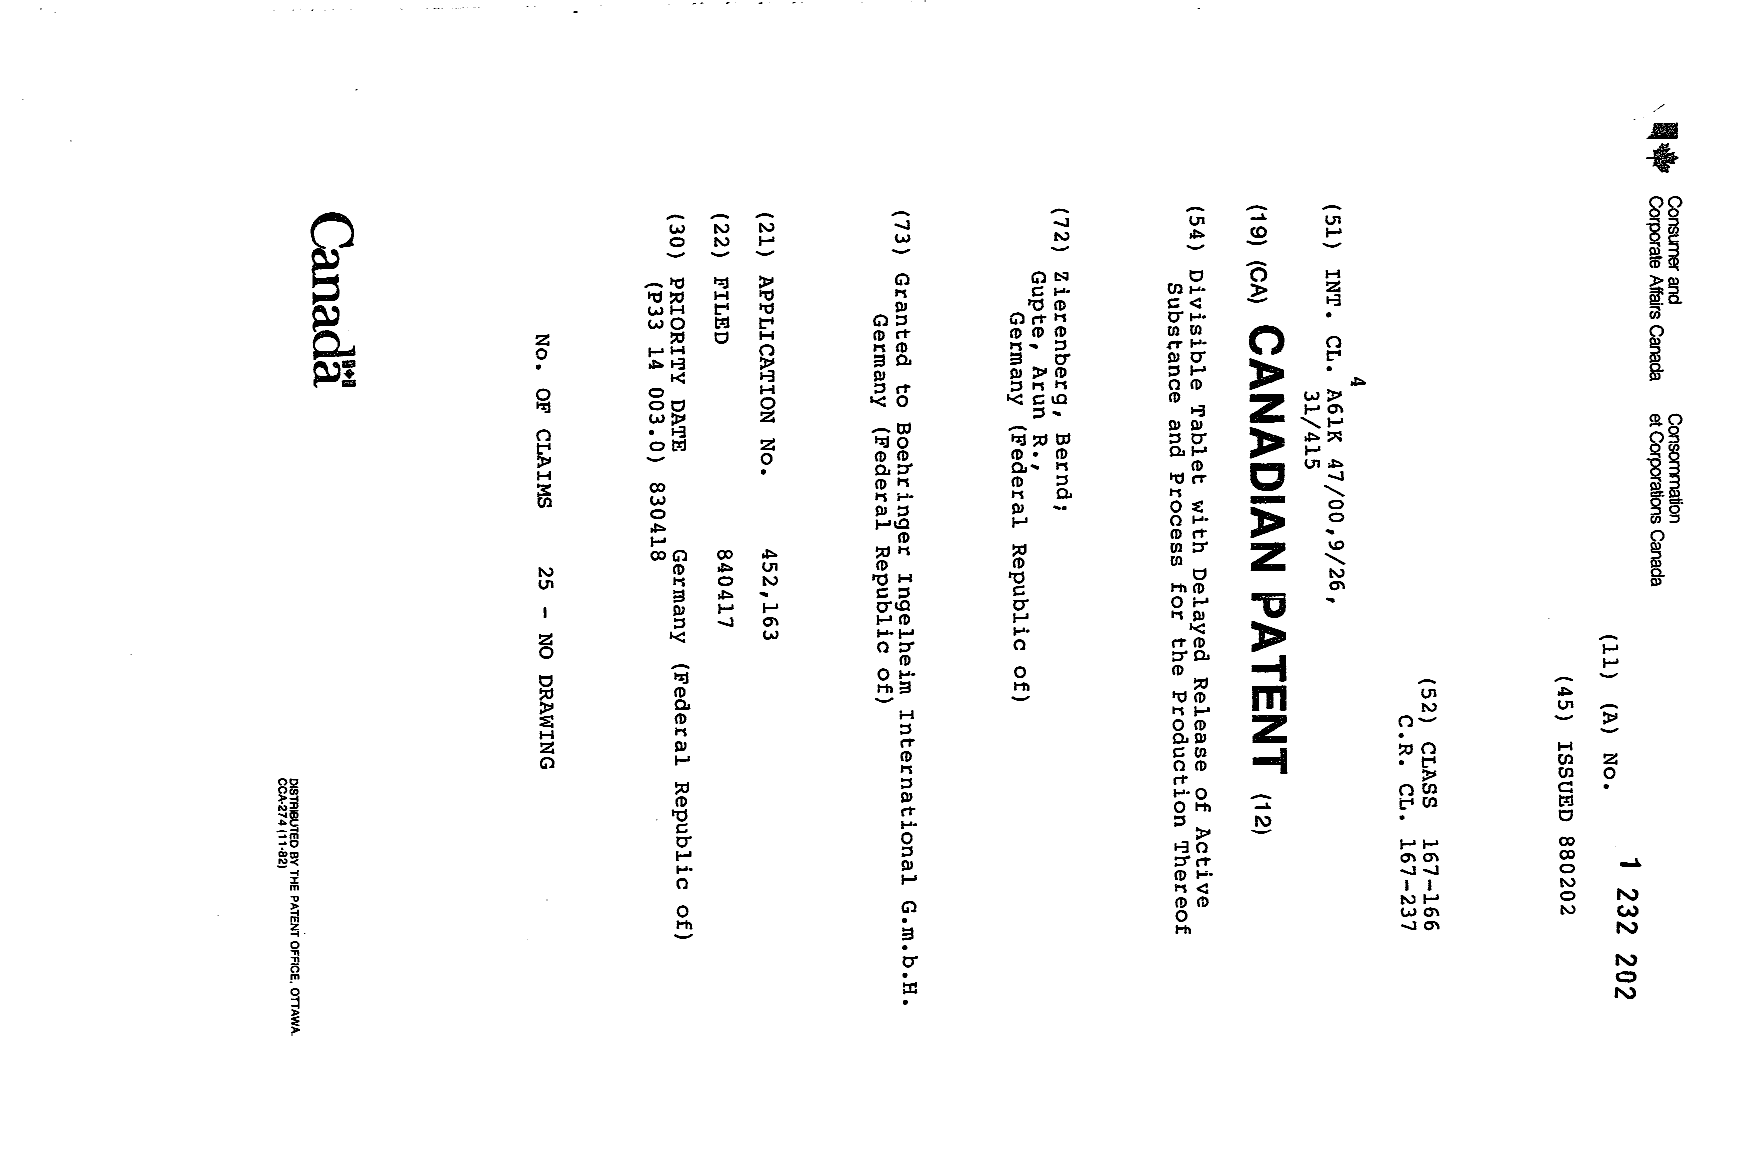 Canadian Patent Document 1232202. Cover Page 19921207. Image 1 of 1